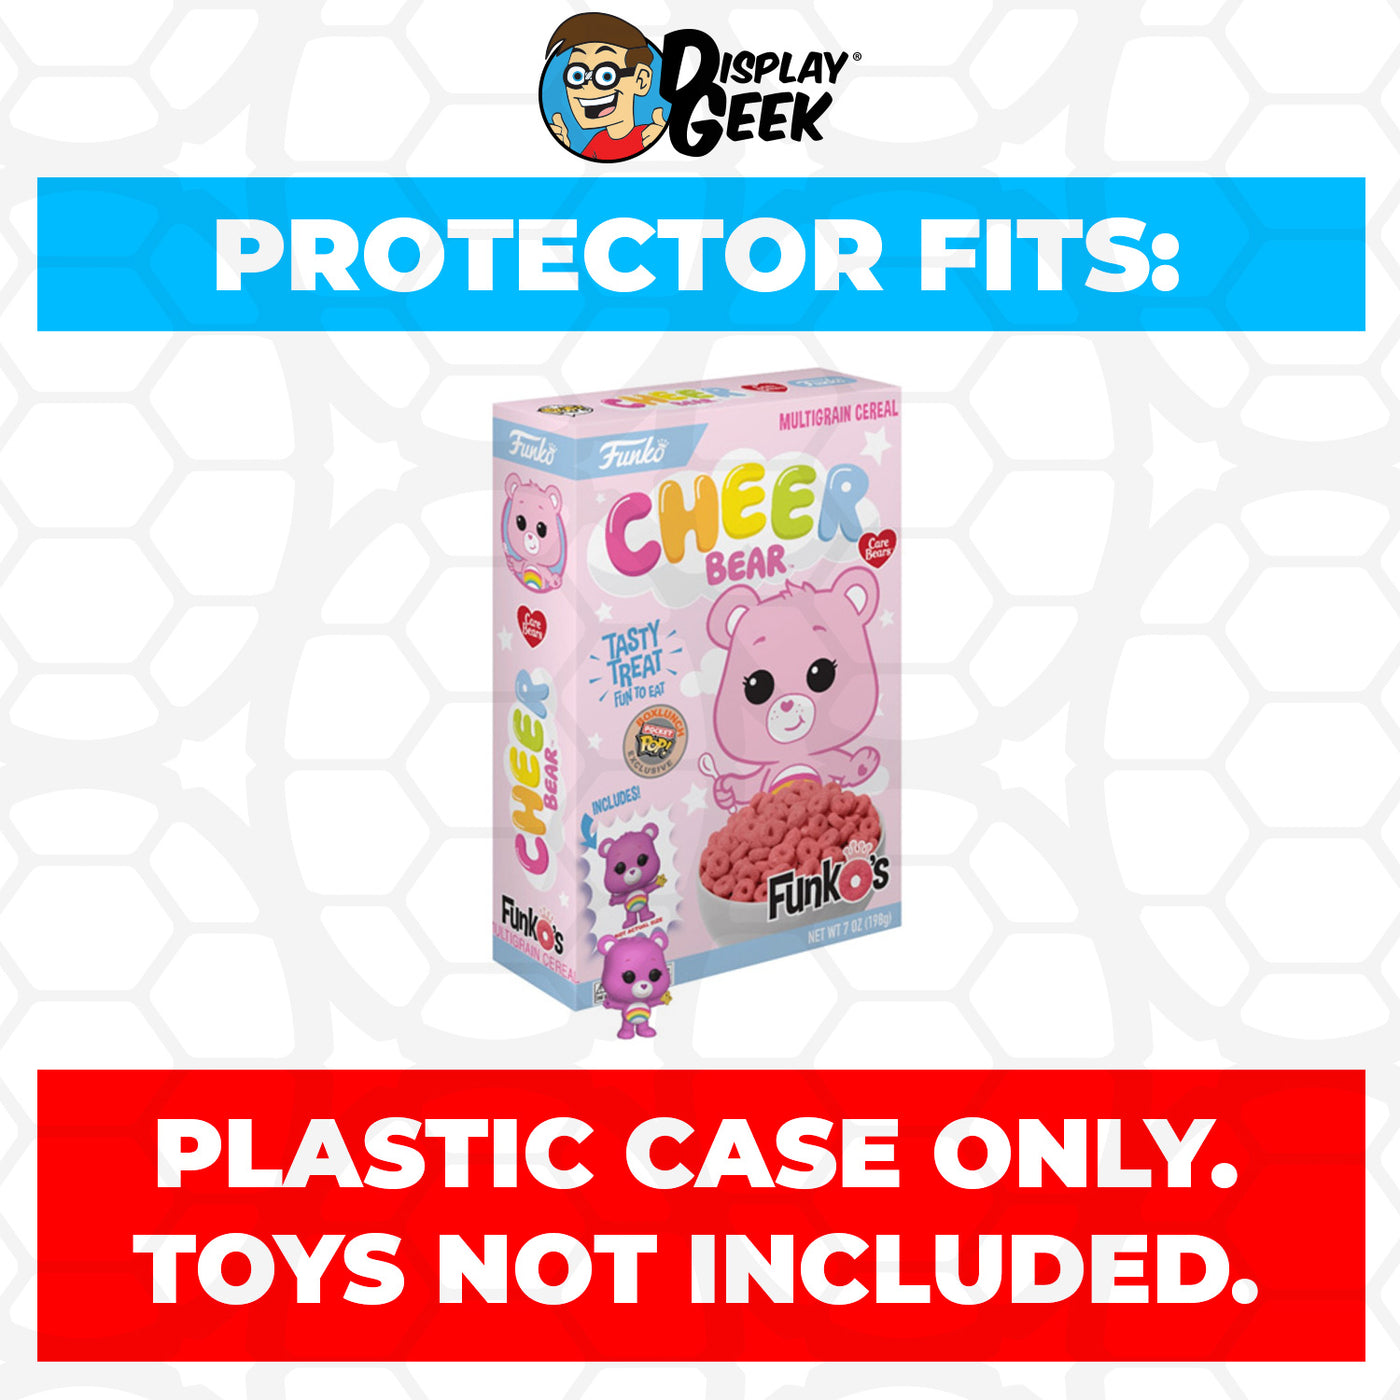 Pop Protector for Cheer Bear FunkO's Cereal Box on The Protector Guide App by Display Geek